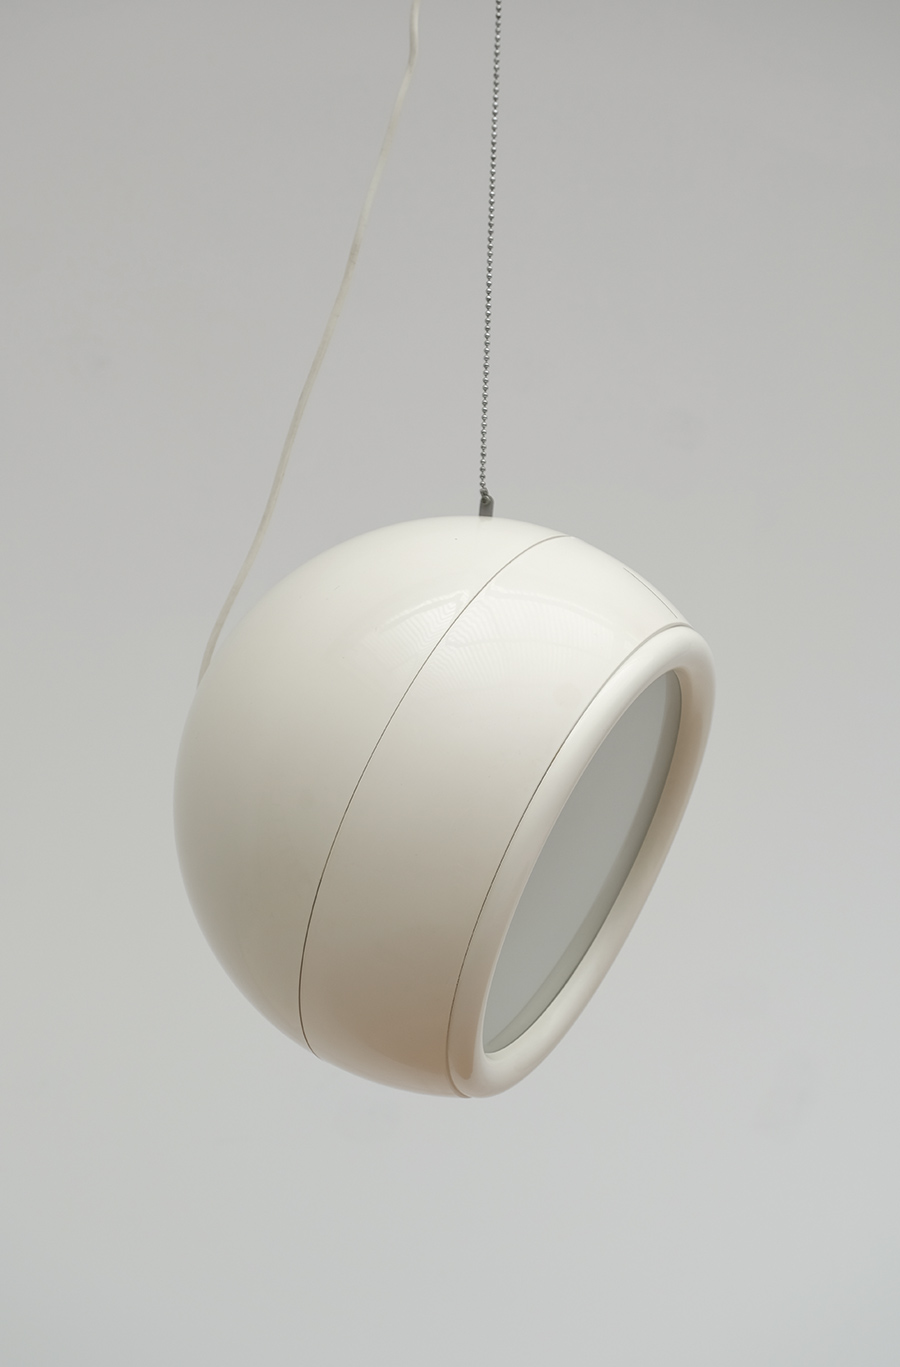 Pallade Lamp by Studio Tetrarch for Artemideimage 5